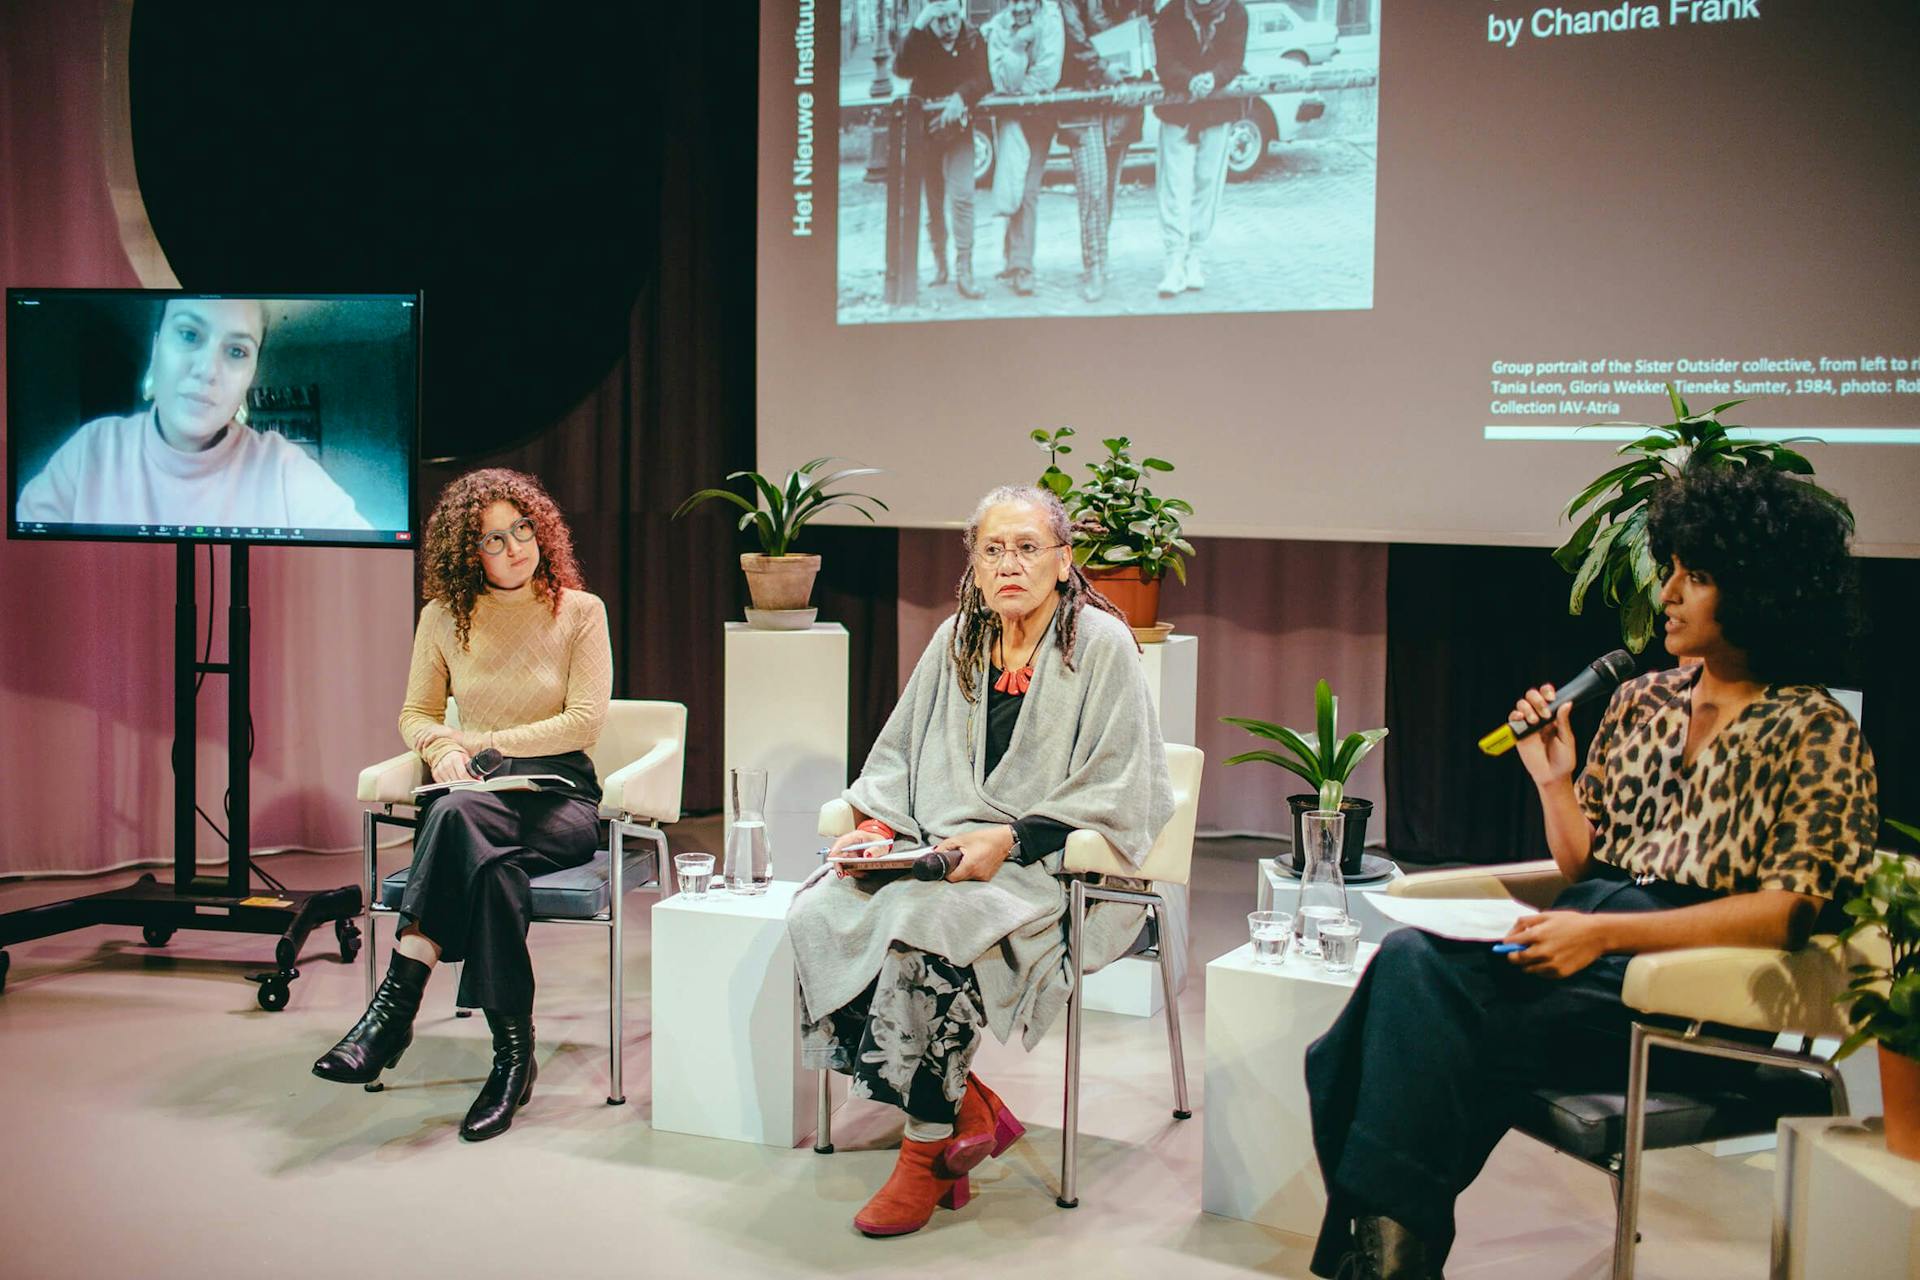 Chandra Frank (on screen), Tabea Nixdorff, Gloria Wekker and Setareh Noorani on stage during Q&A Session at the Feminist Assembly Month Finale, September 24, 2022, at the Nieuwe Instituut, photo: Simaa 